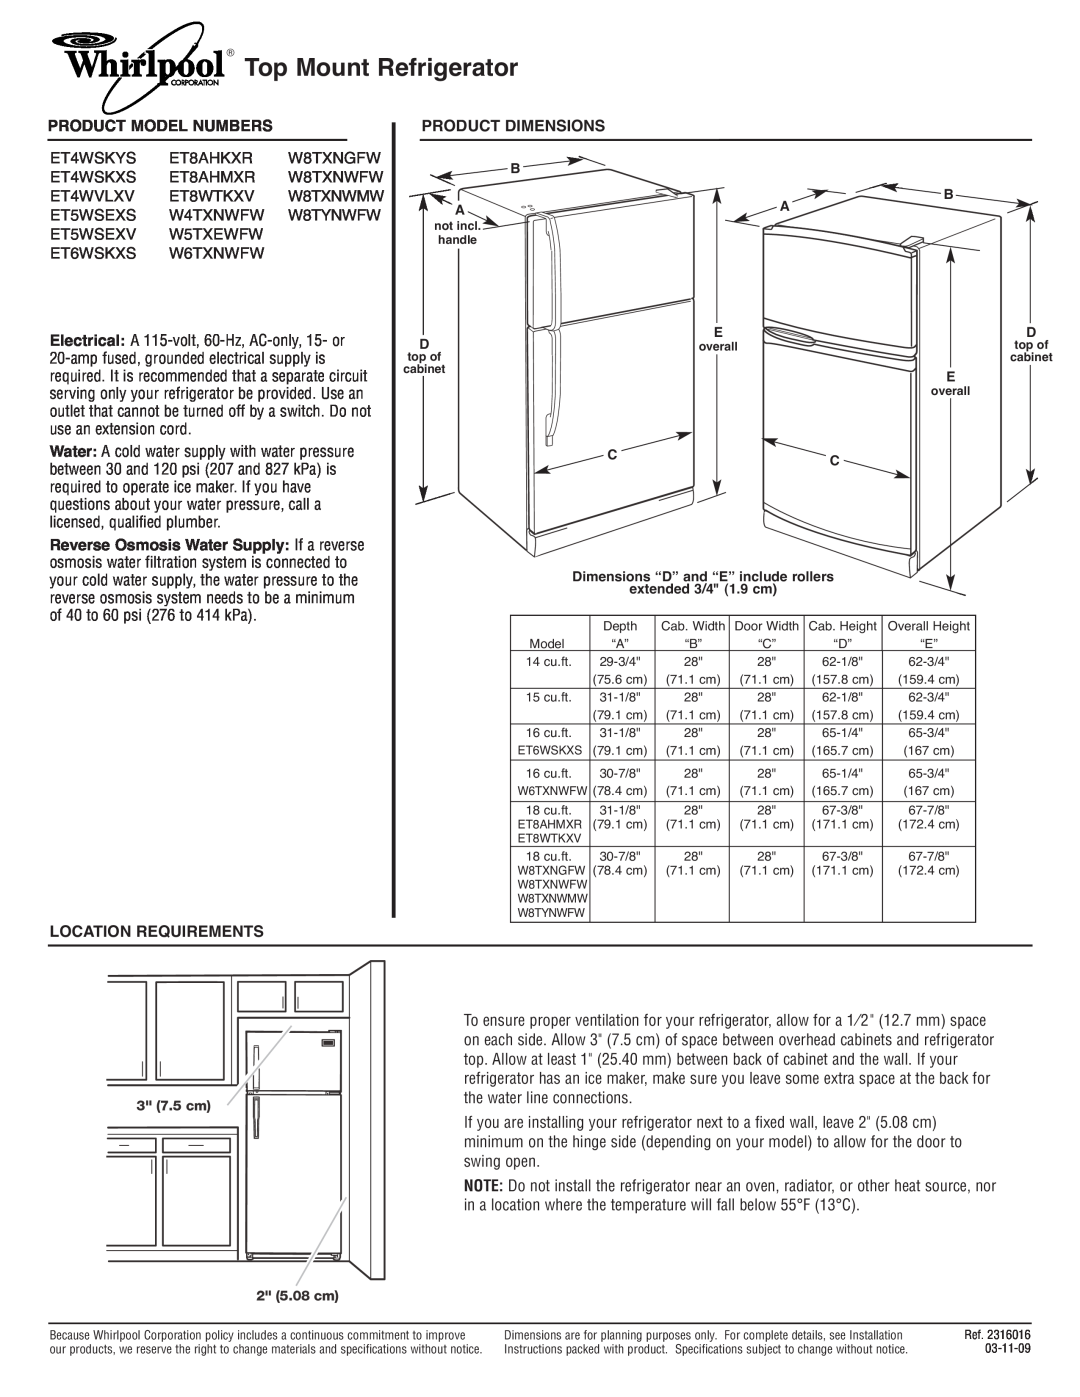 Whirlpool W8TXNWFW dimensions Top Mount Refrigerator, Product Model Numbers, Location Requirements, Product Dimensions 